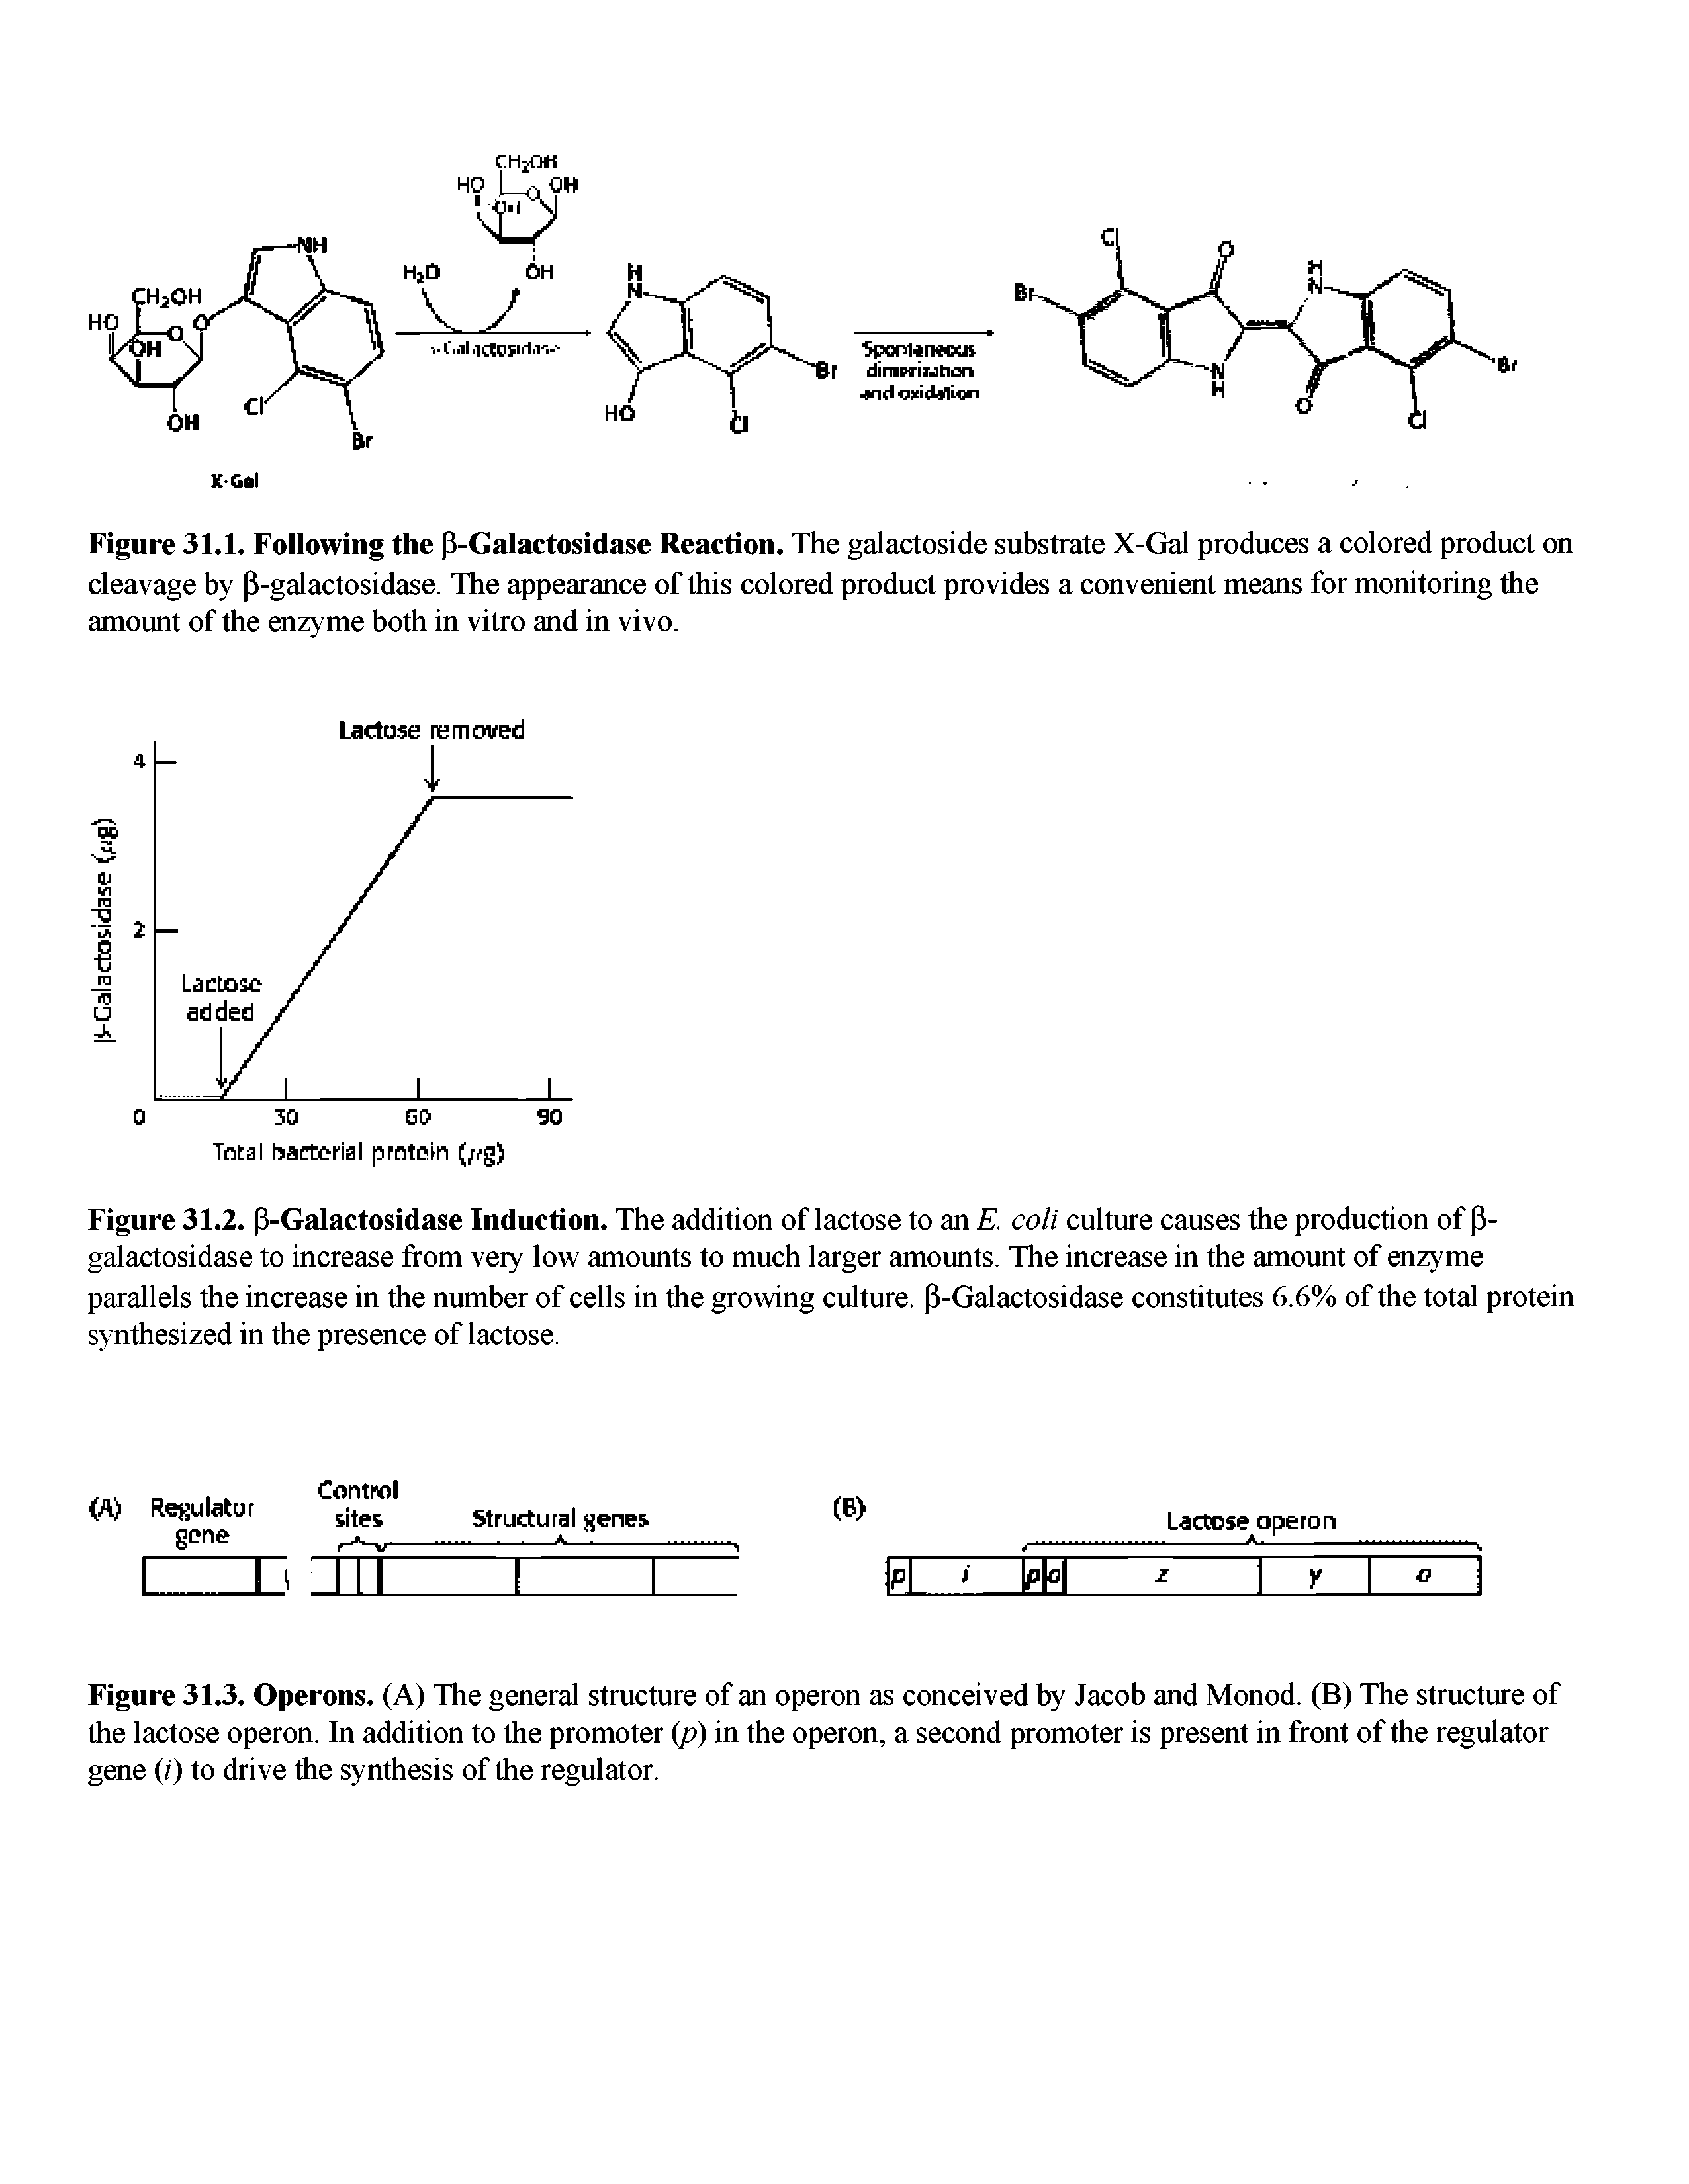 Figure 31.2. P-Galactosidase Induction. The addition of lactose to an E. coli culture causes the production of P-galactosidase to increase from very low amounts to much larger amounts. The increase in the amount of enzyme parallels the increase in the number of cells in the growing culture. P-Galactosidase constitutes 6.6% of the total protein synthesized in the presence of lactose.